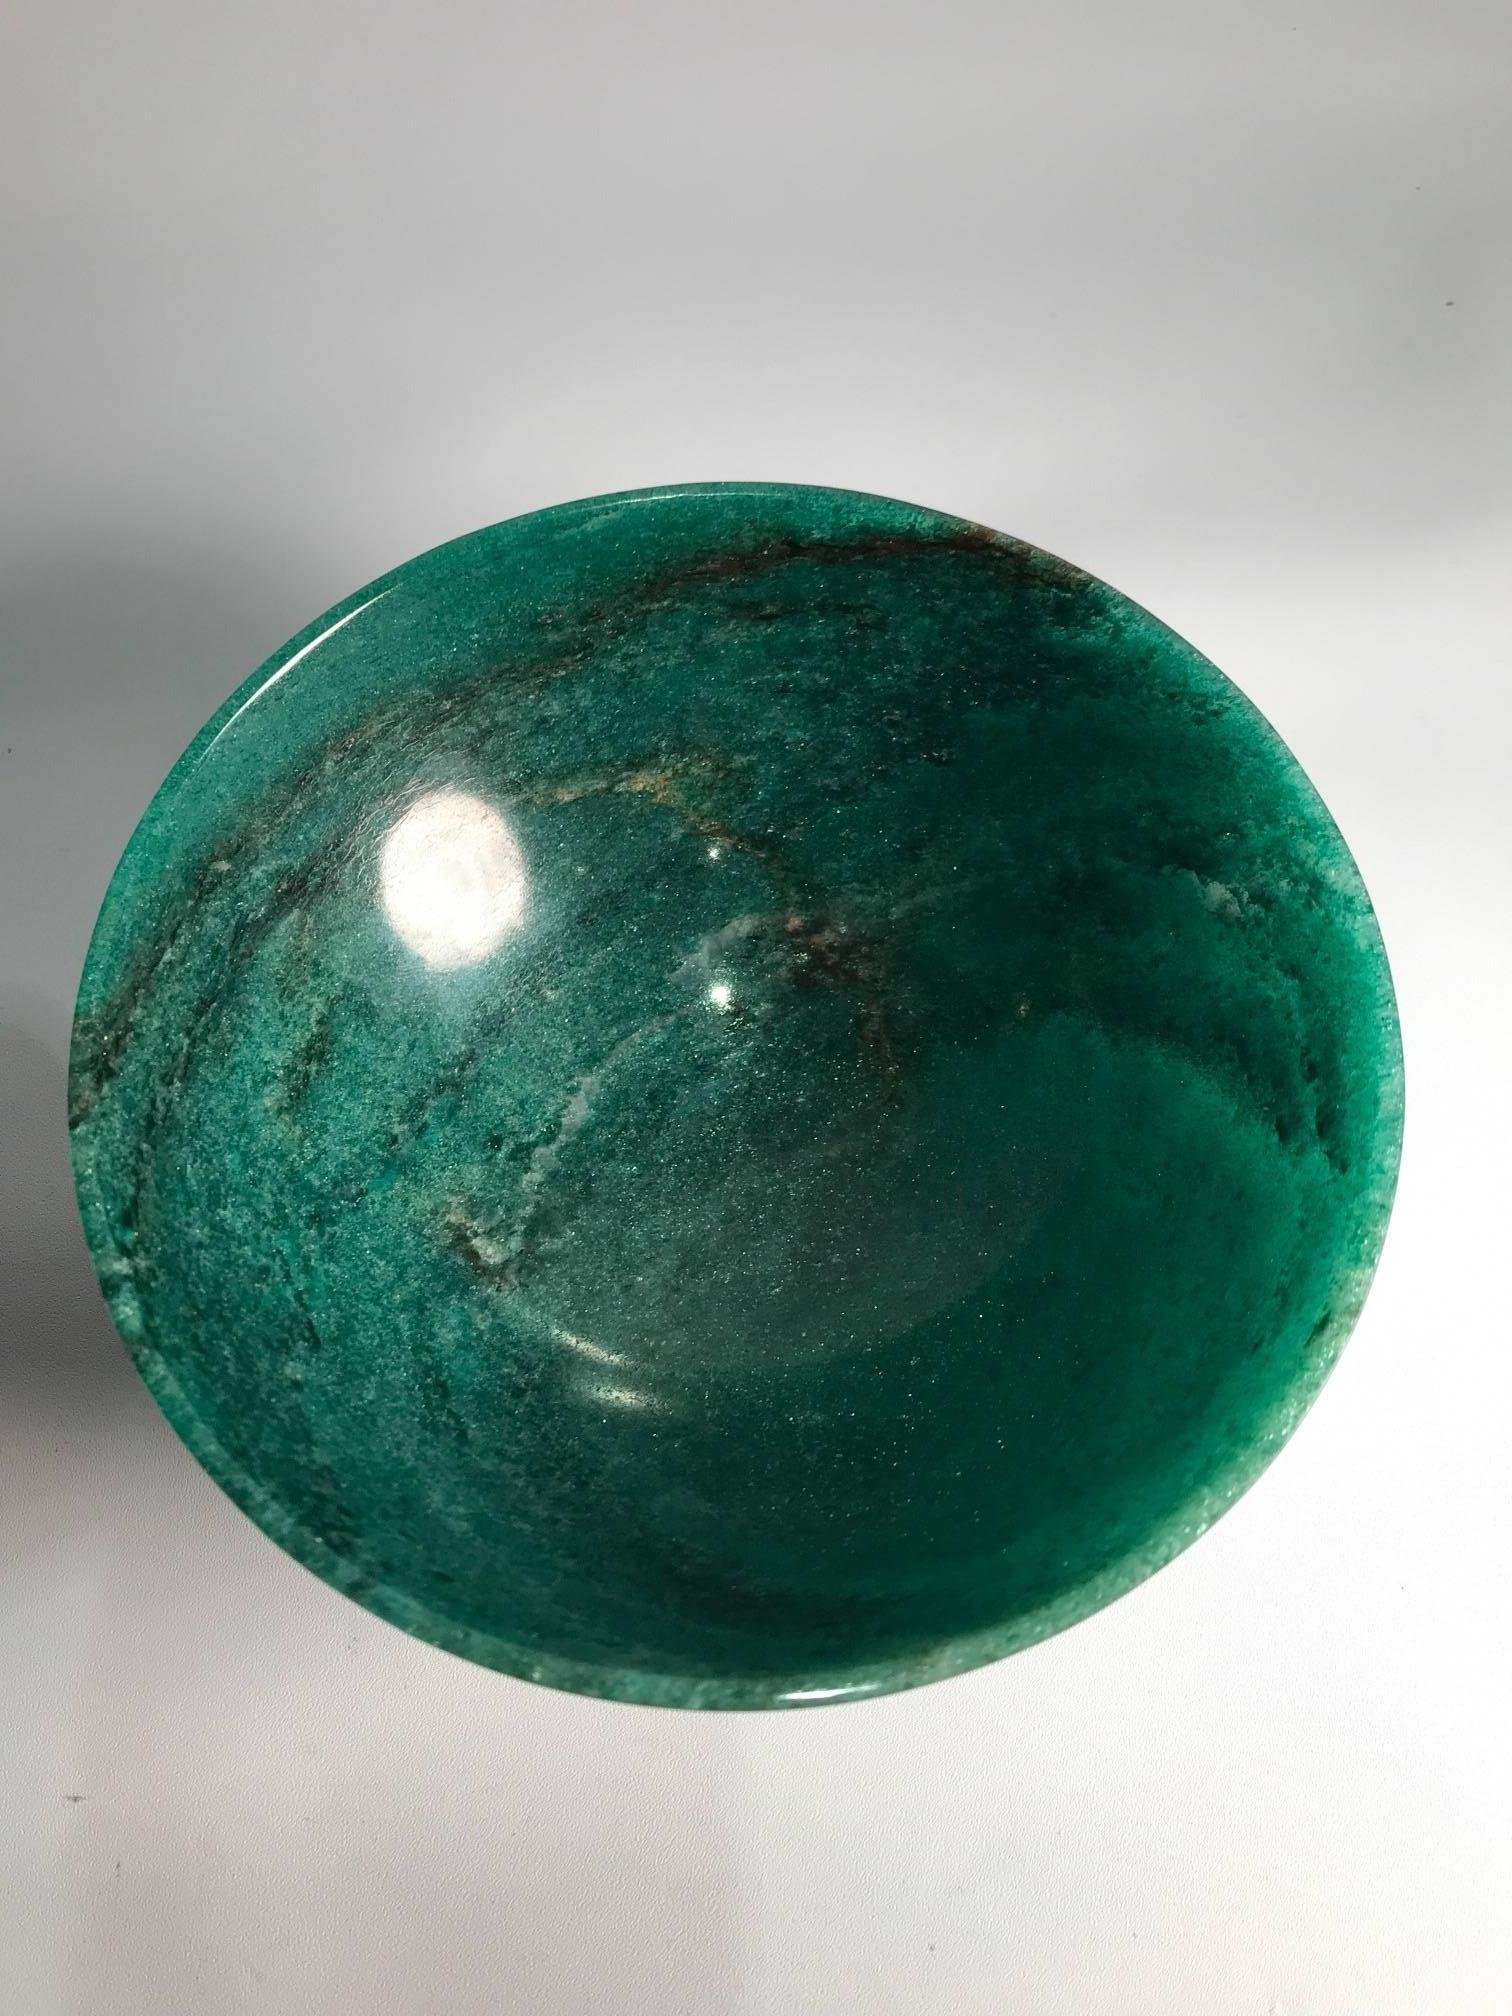 Hand-carved Aventurine Jade bowl from India. Aventurine is a form of quartz, characterized by its translucency and the presence of different layers of mineral inclusions that give a shimmering or glistening effect termed aventurescence.